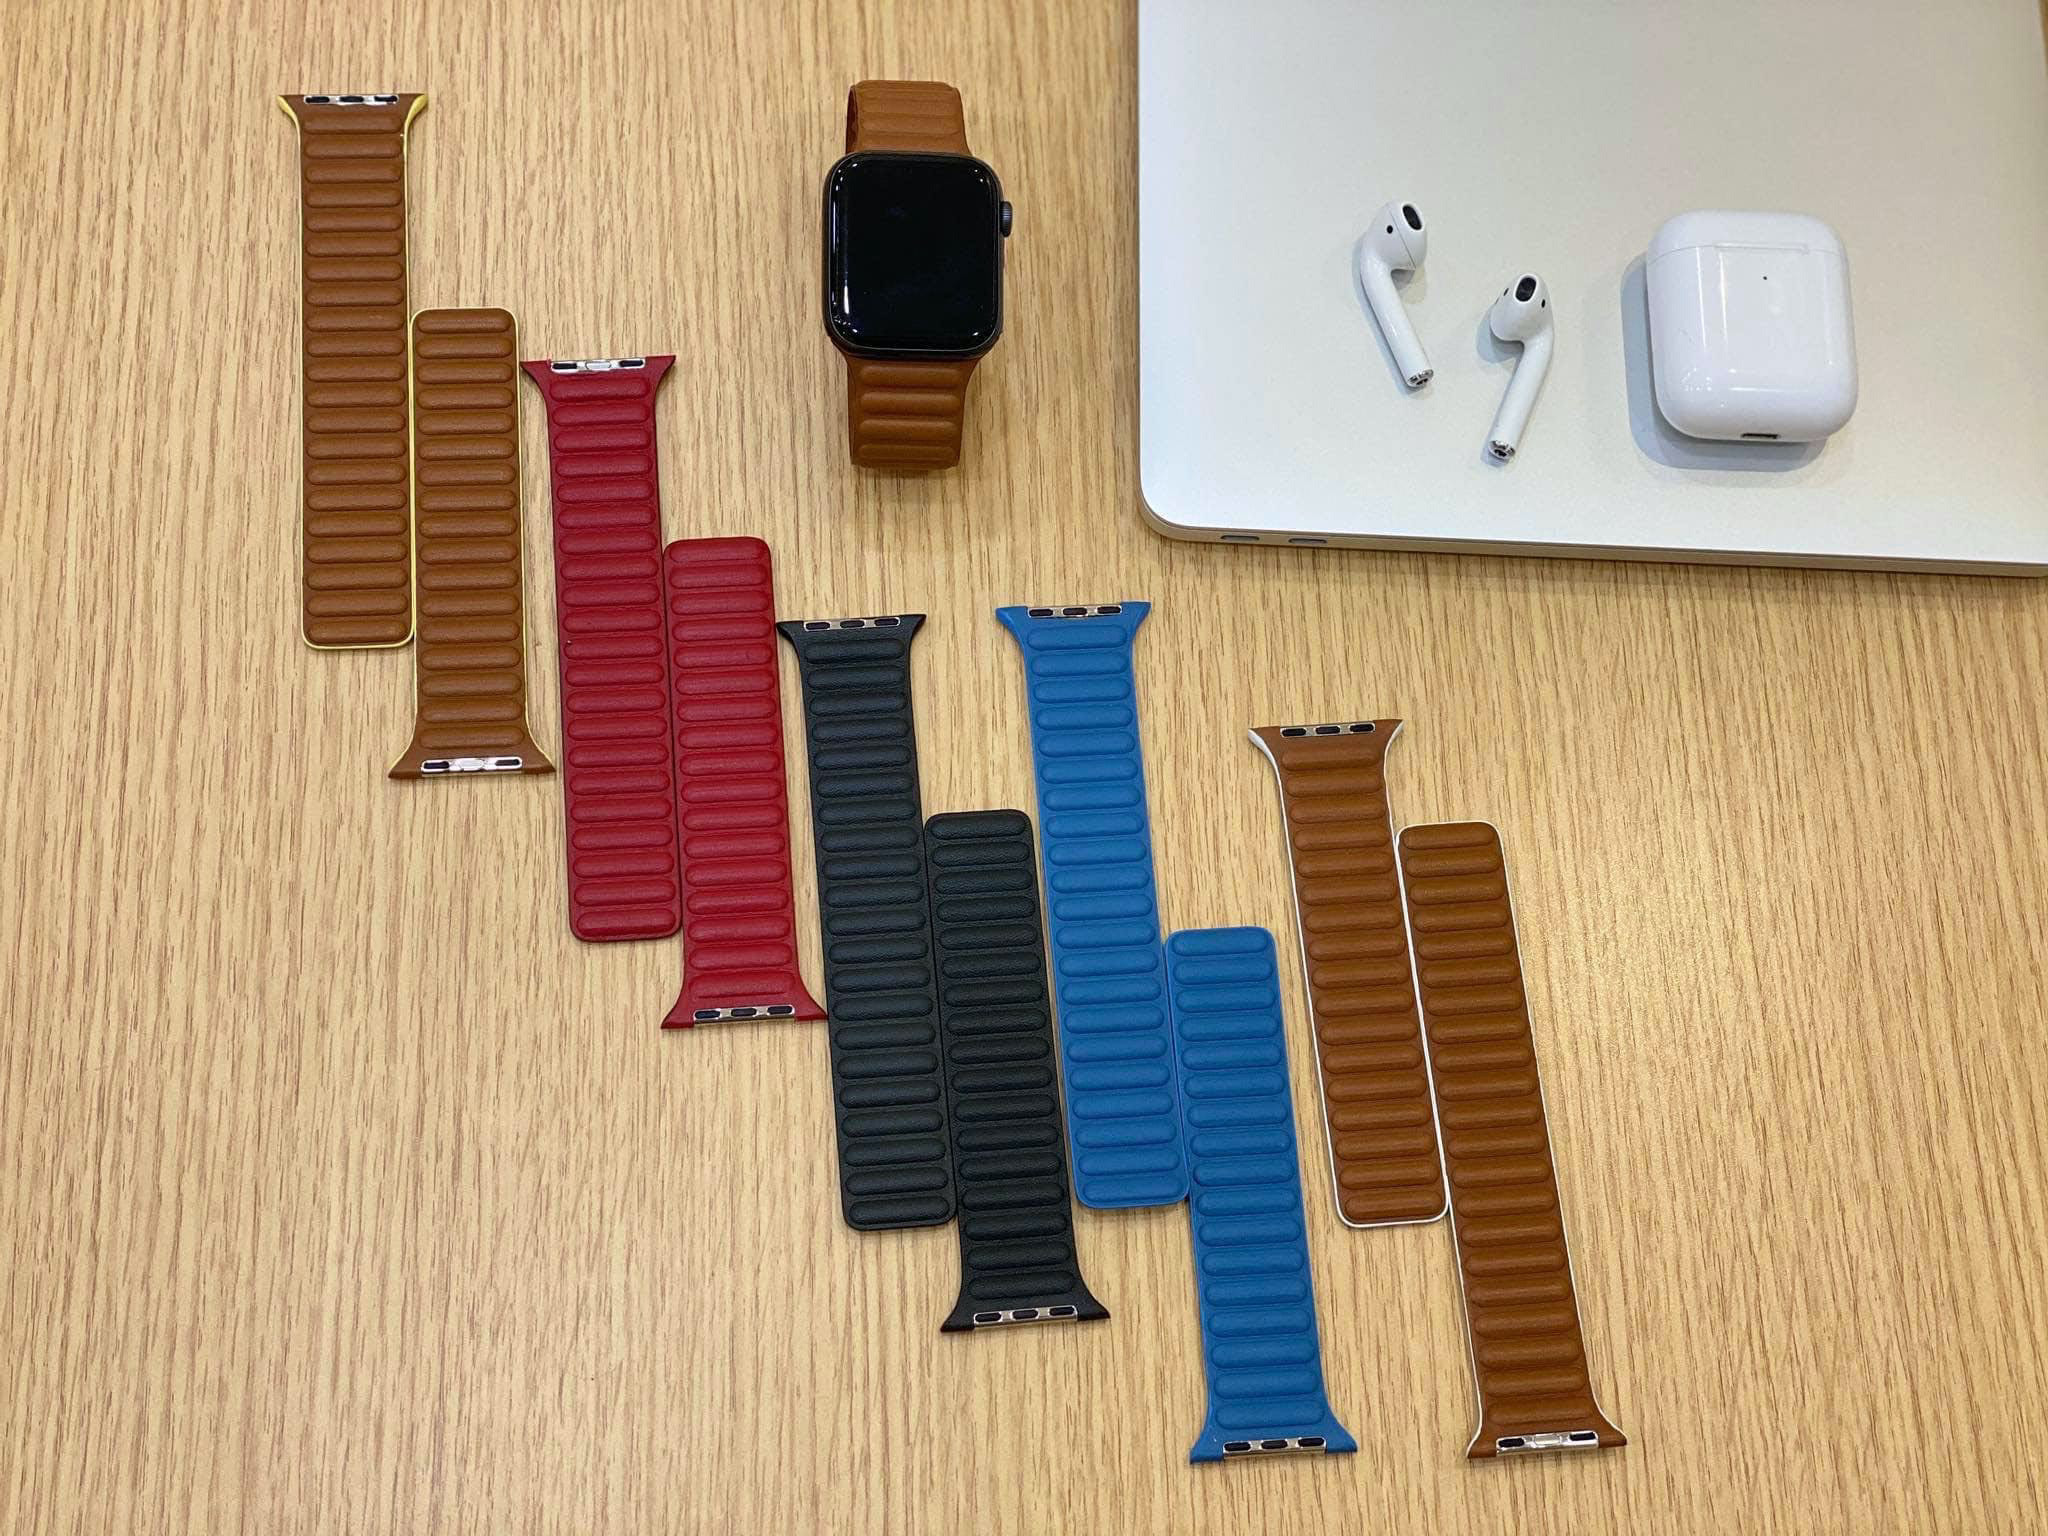 Calamity Mentor Invitere Update: New pictures and video] Leaked images may show redesigned Leather  Loop for Apple Watch - 9to5Mac